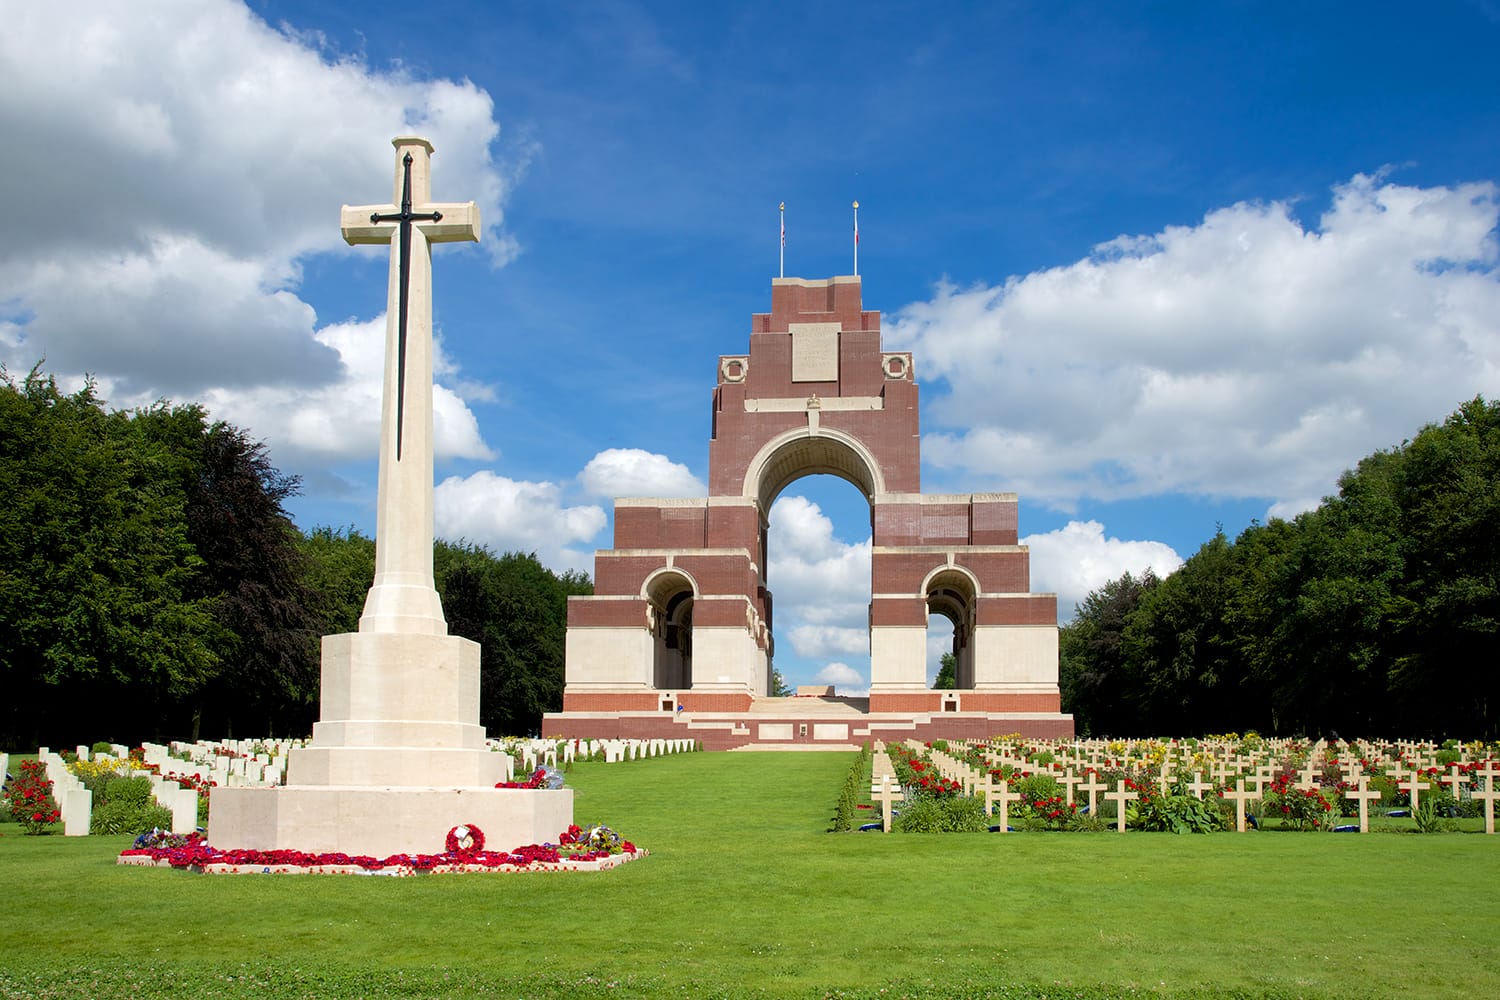 The cemetery and memorial to the missing shortly after the 100th Anniversary of the Battle of the Somme, France